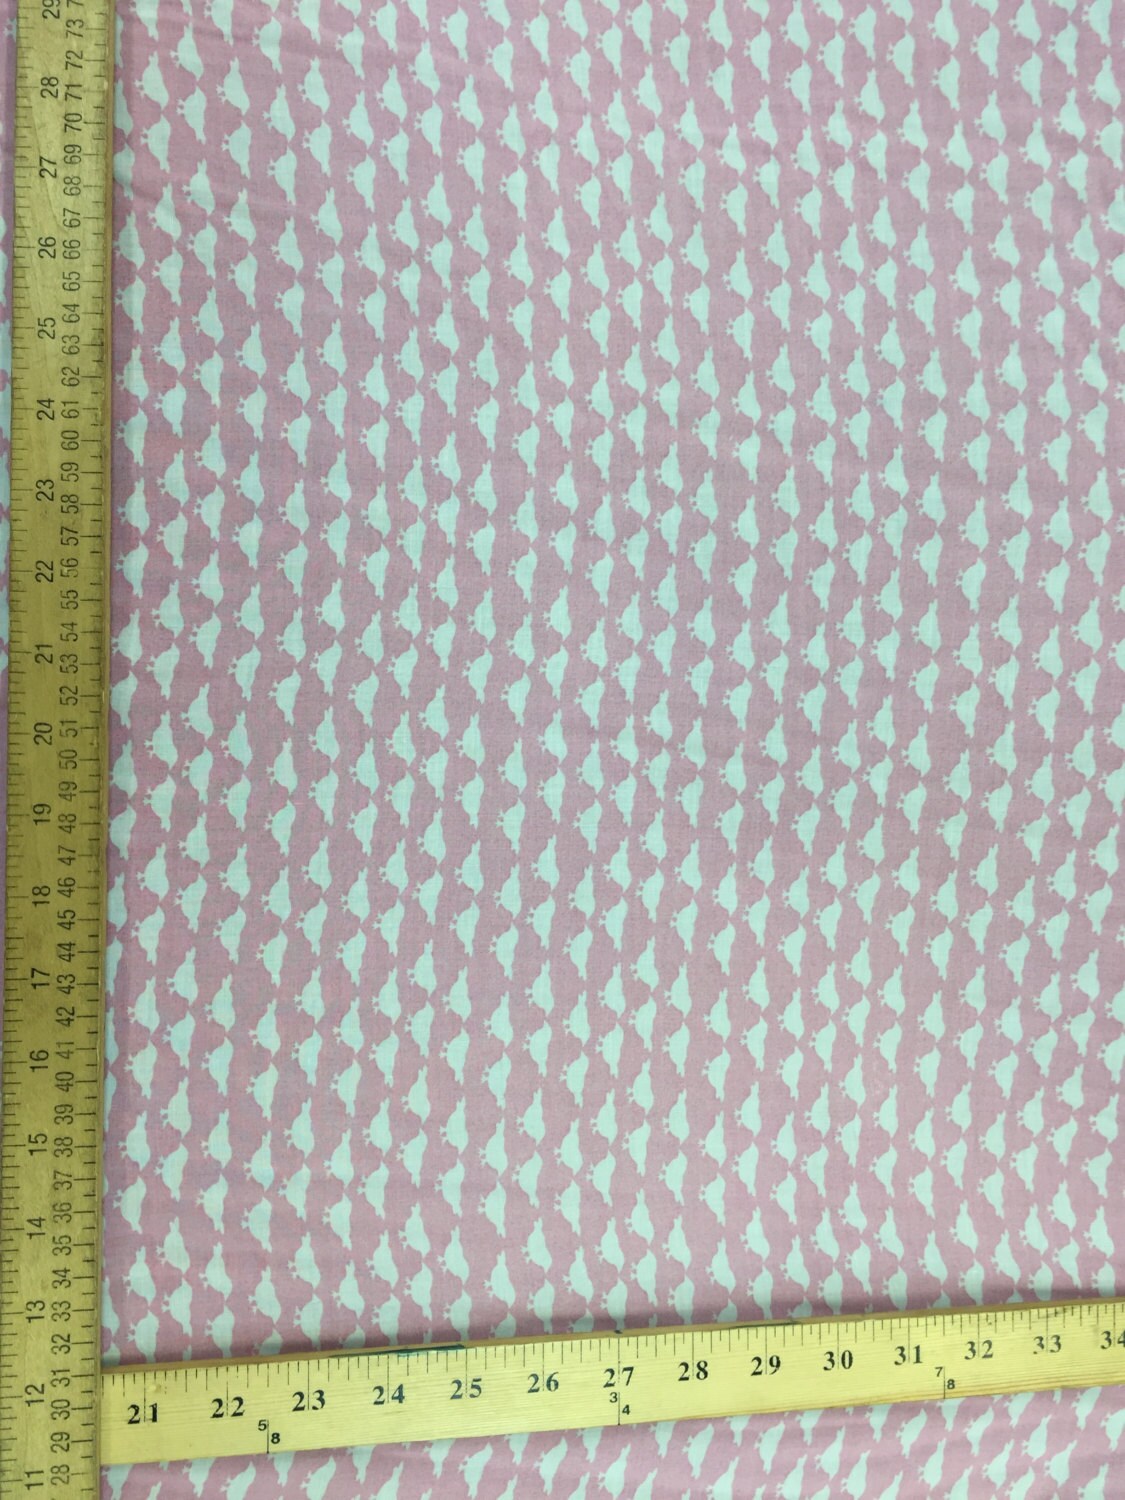 Rayon challis birds on light pink background Fabric Sold by the yard soft organic kids fabric flowy ligth weight